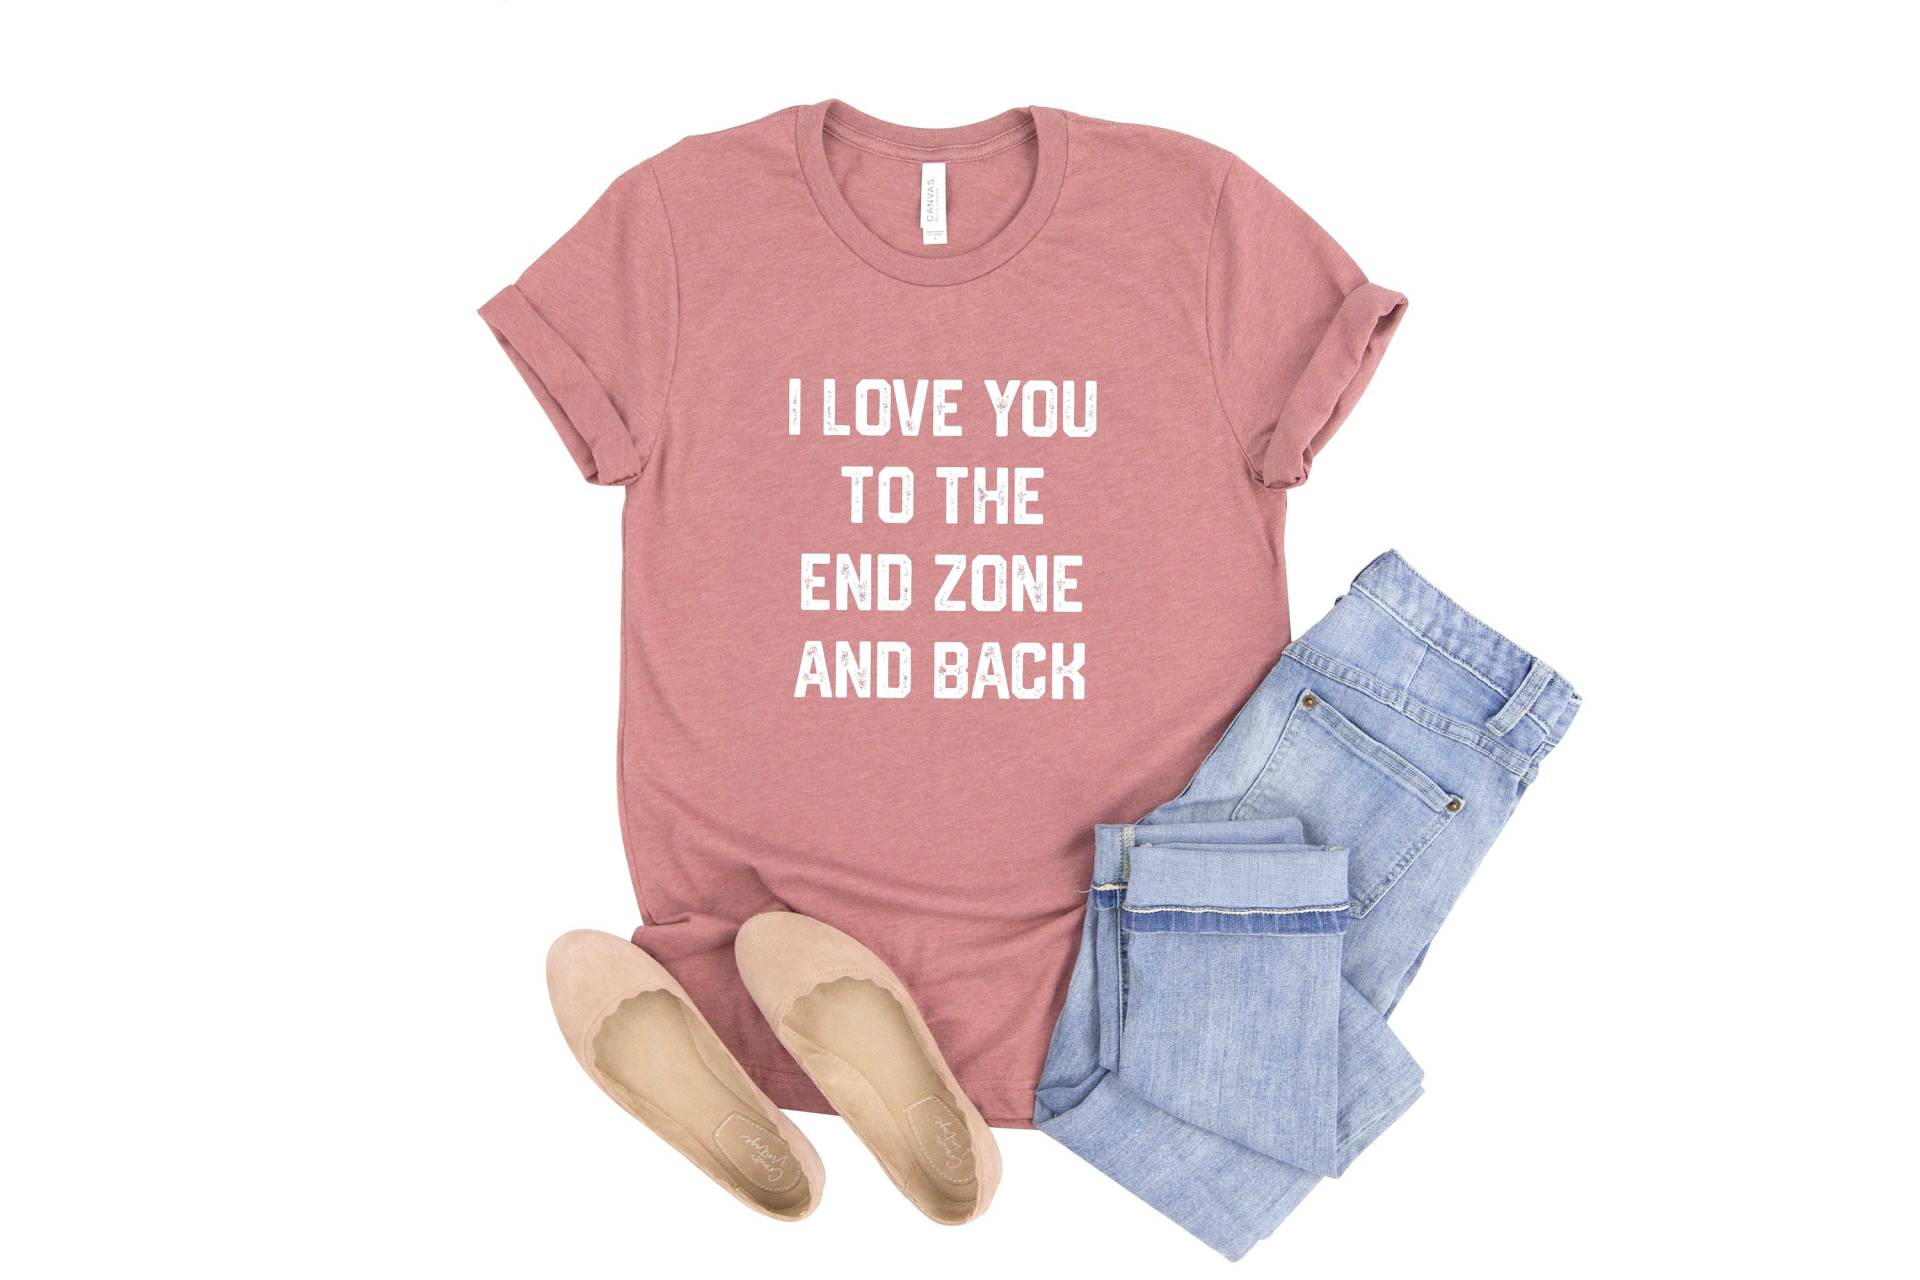 I Love You To The End Zone & Back Shirt, Football Funny High School College Shirt von LavenderBluesMarket